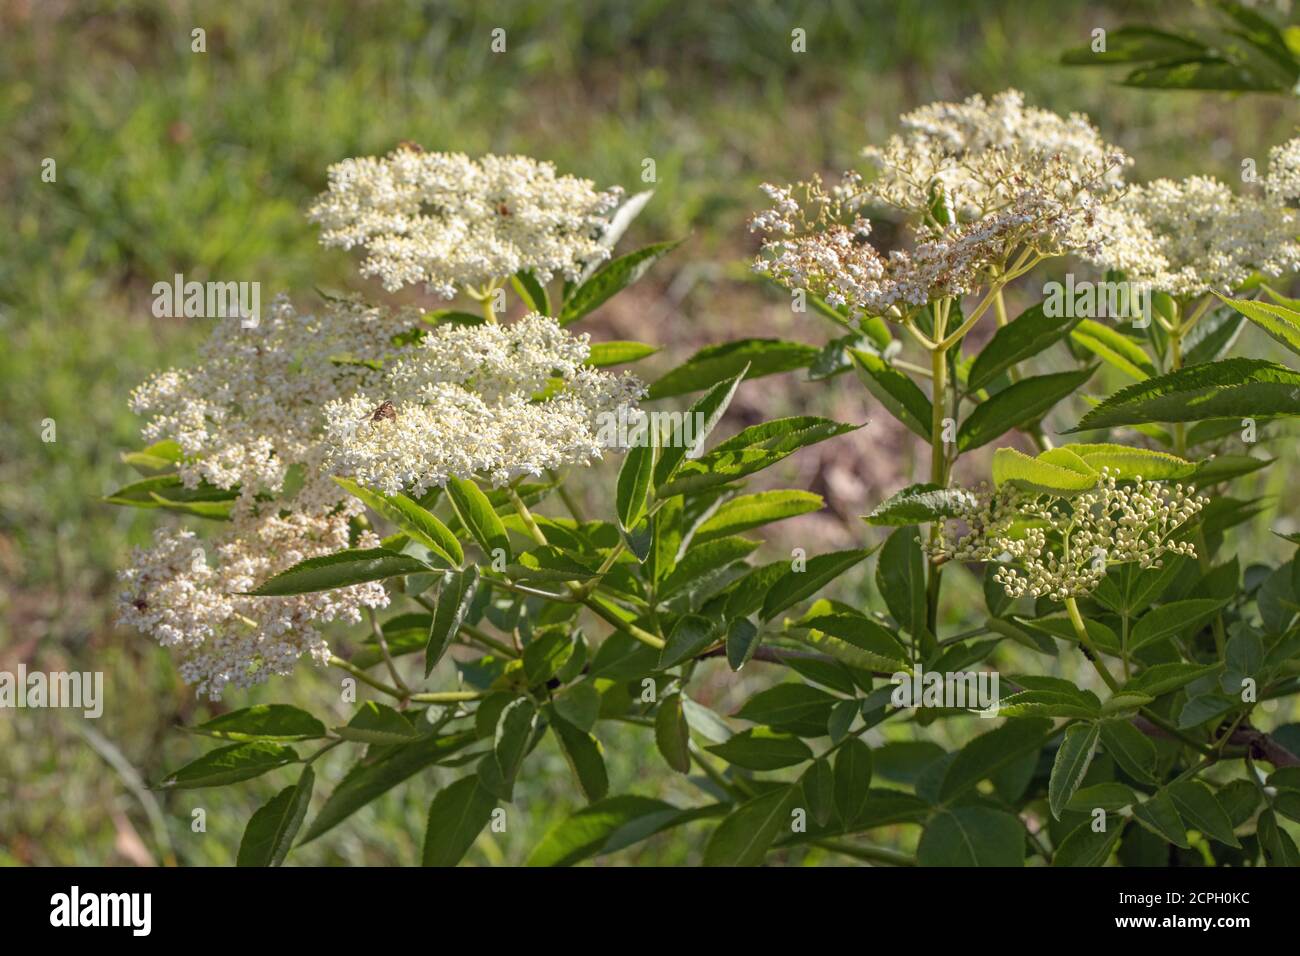 Elder (Sambucus nigra). Multiple bunches of flat-topped heads of numerous cream-white flowers. Stalked compound leaves of five to severn leaflets. Att Stock Photo